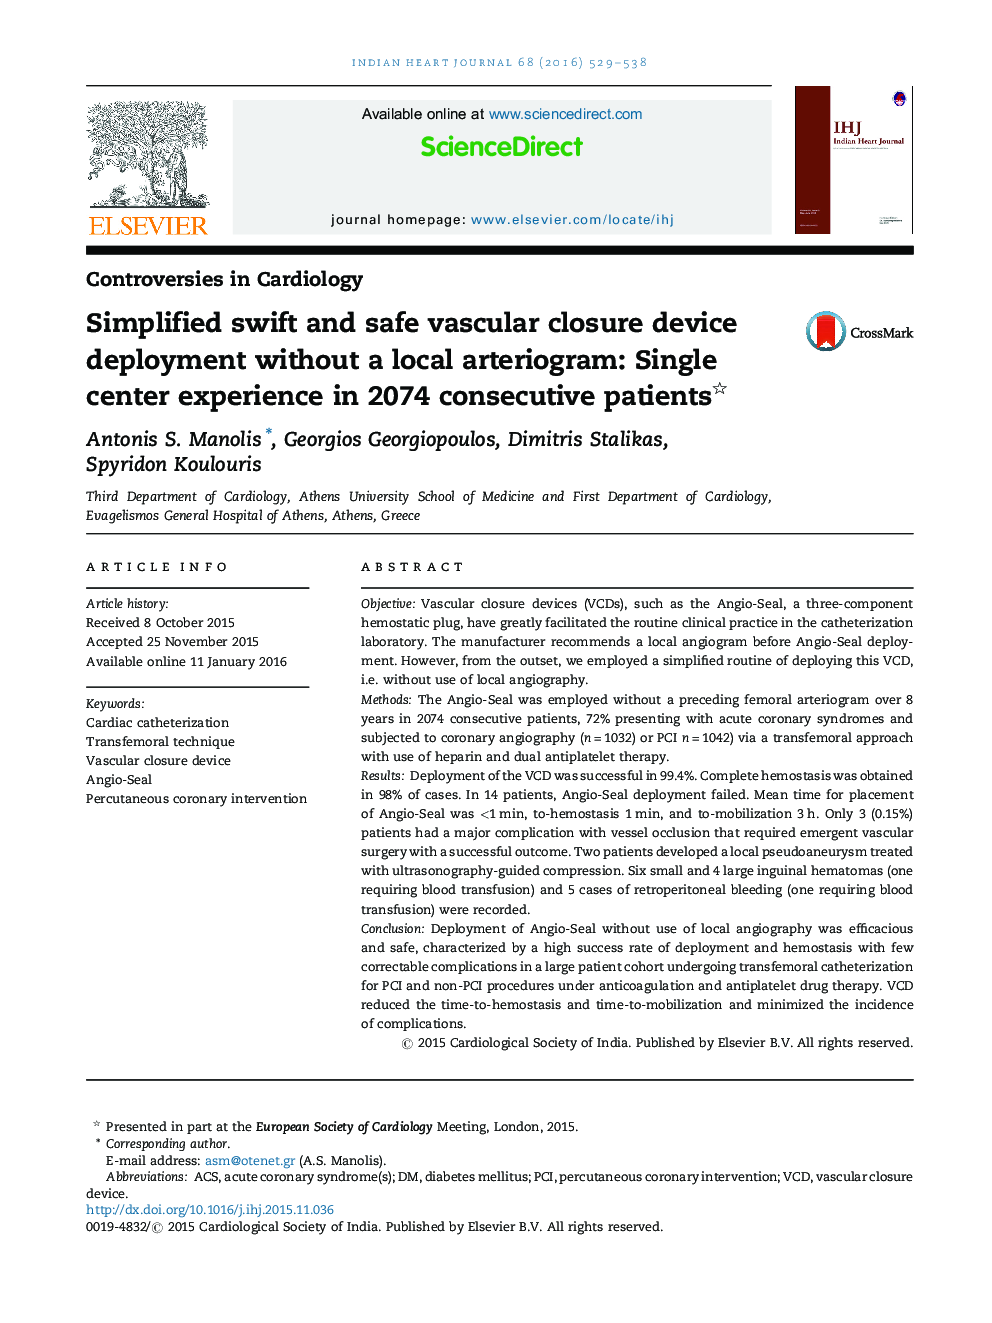 Simplified swift and safe vascular closure device deployment without a local arteriogram: Single center experience in 2074 consecutive patients 